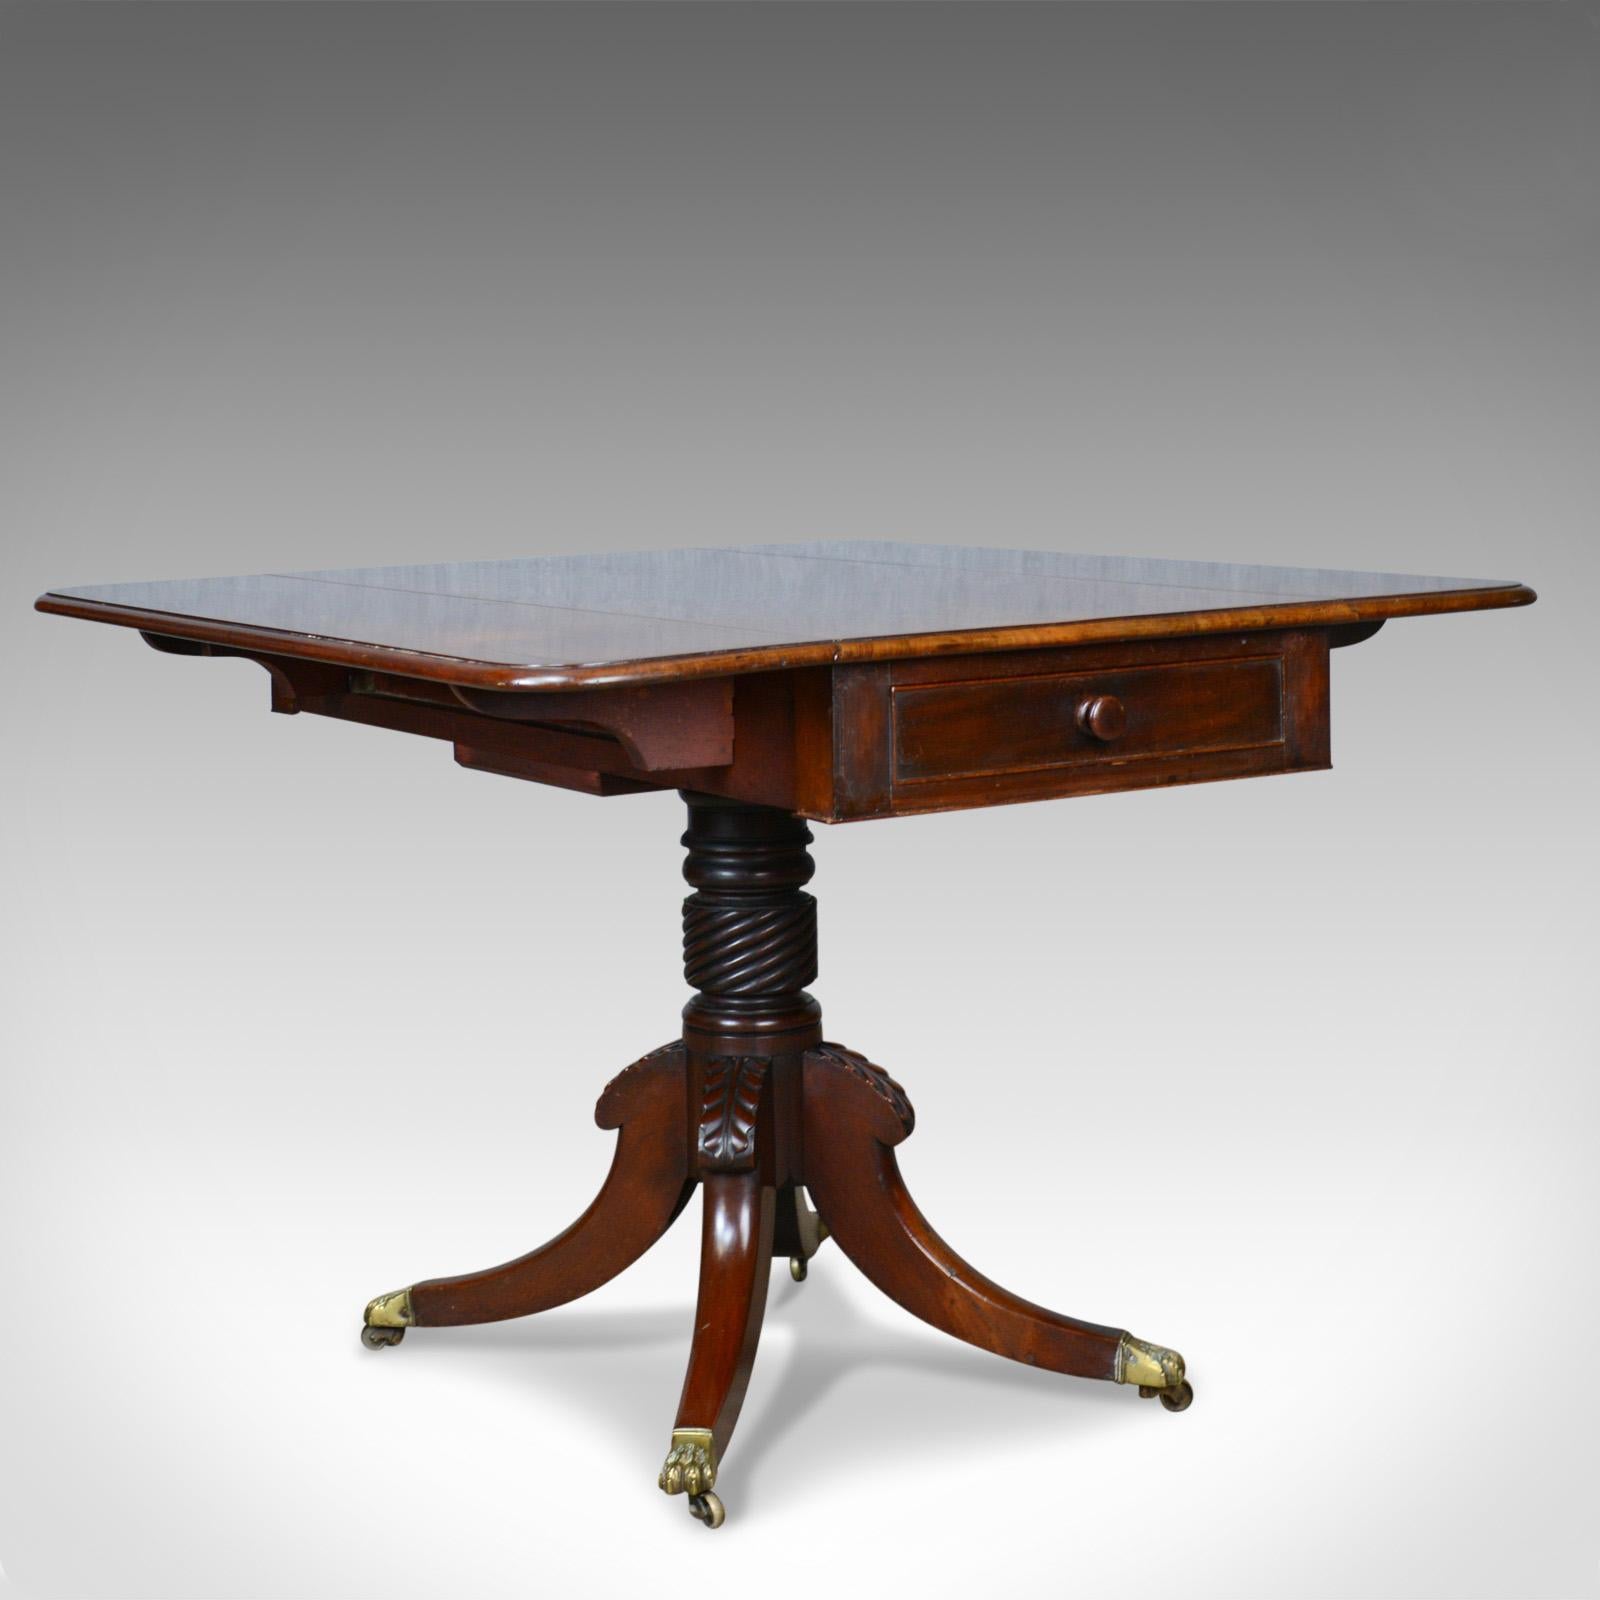 This is an antique Pembroke table in mahogany. An English, Regency drop flap dining table dating to the early 19th century, circa 1820.

Fine example in select mahogany with attractive mid-tone palette
Grain interest with desirable aged